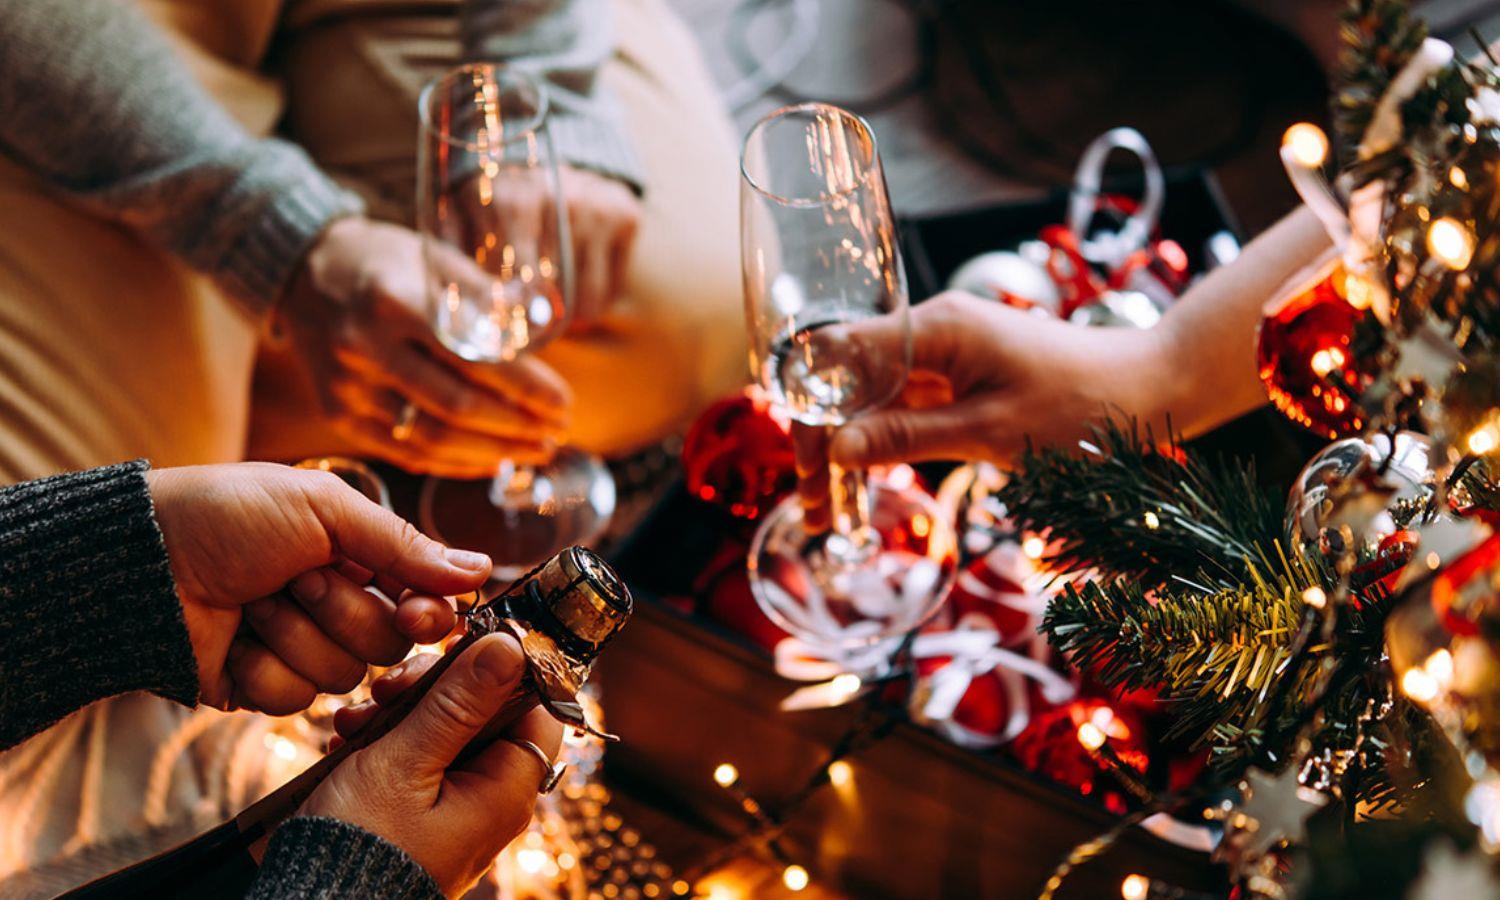 Hands holding champagne glasses near Christmas tree